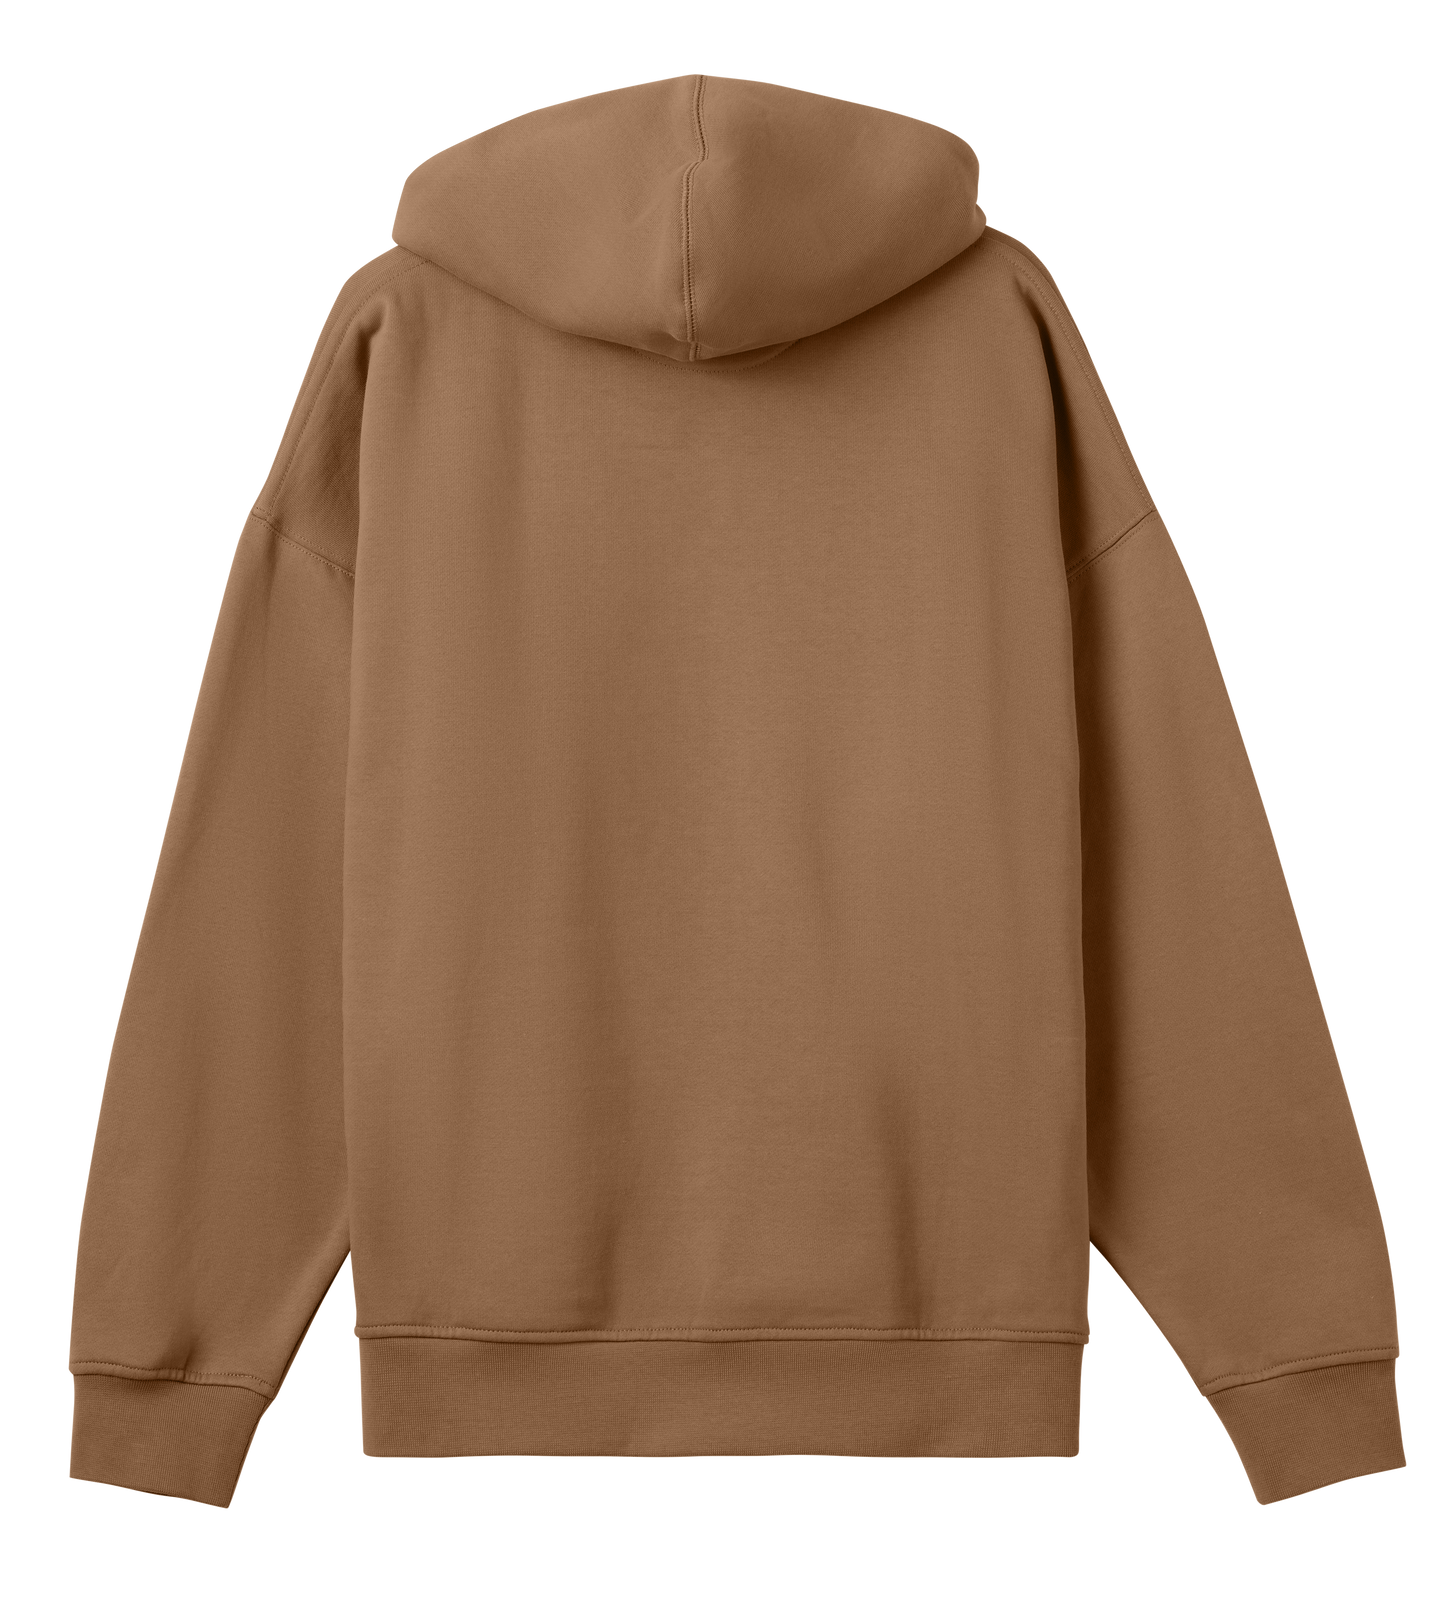 'No Knife No life' Men's Boxy Hoodie - Toffee Brown